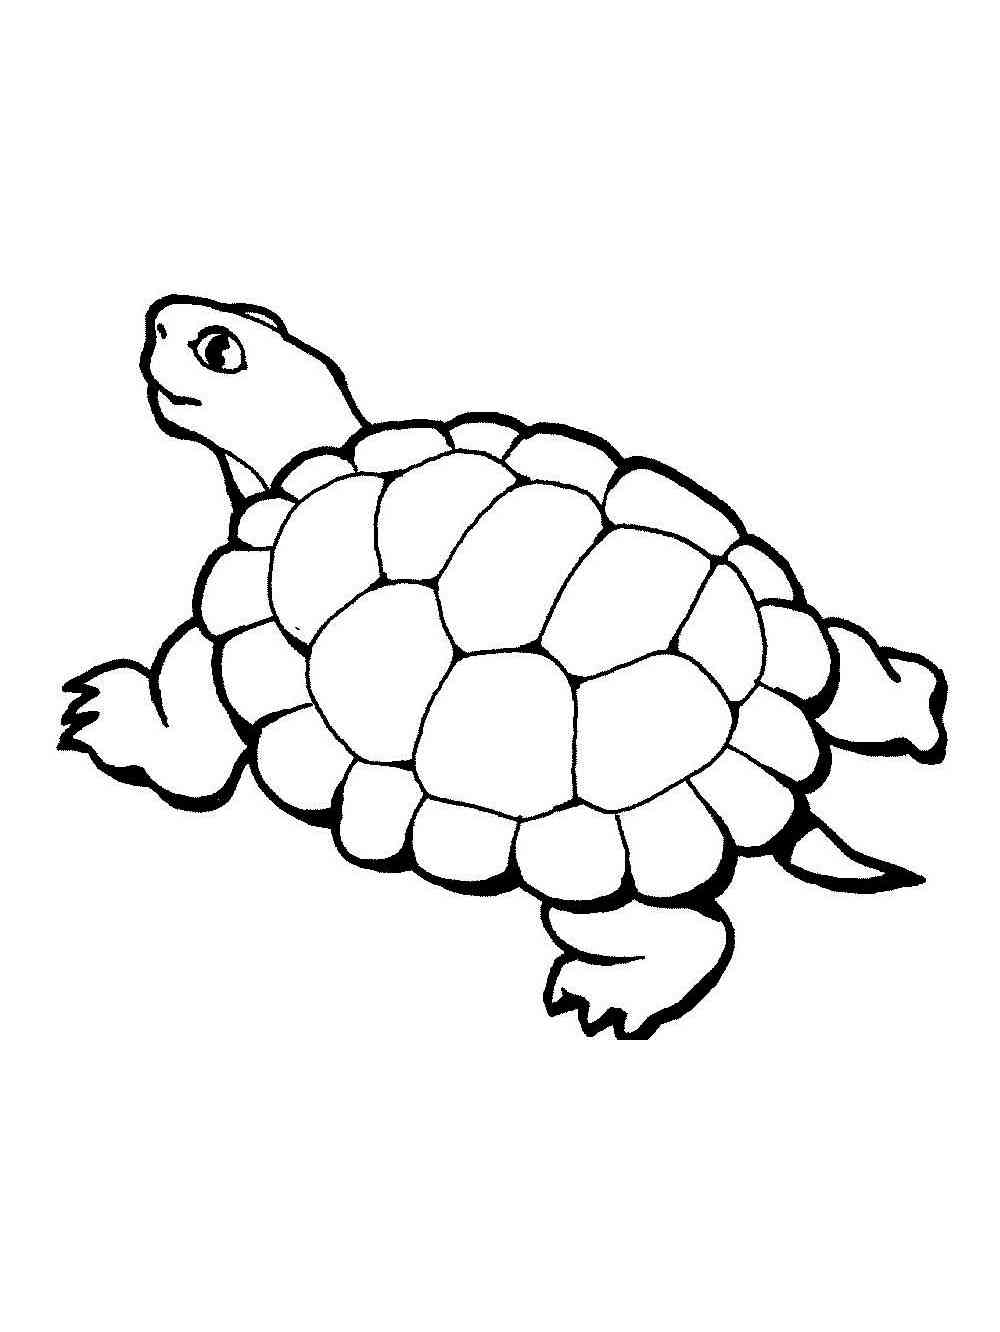 Eastern Box Turtle coloring page